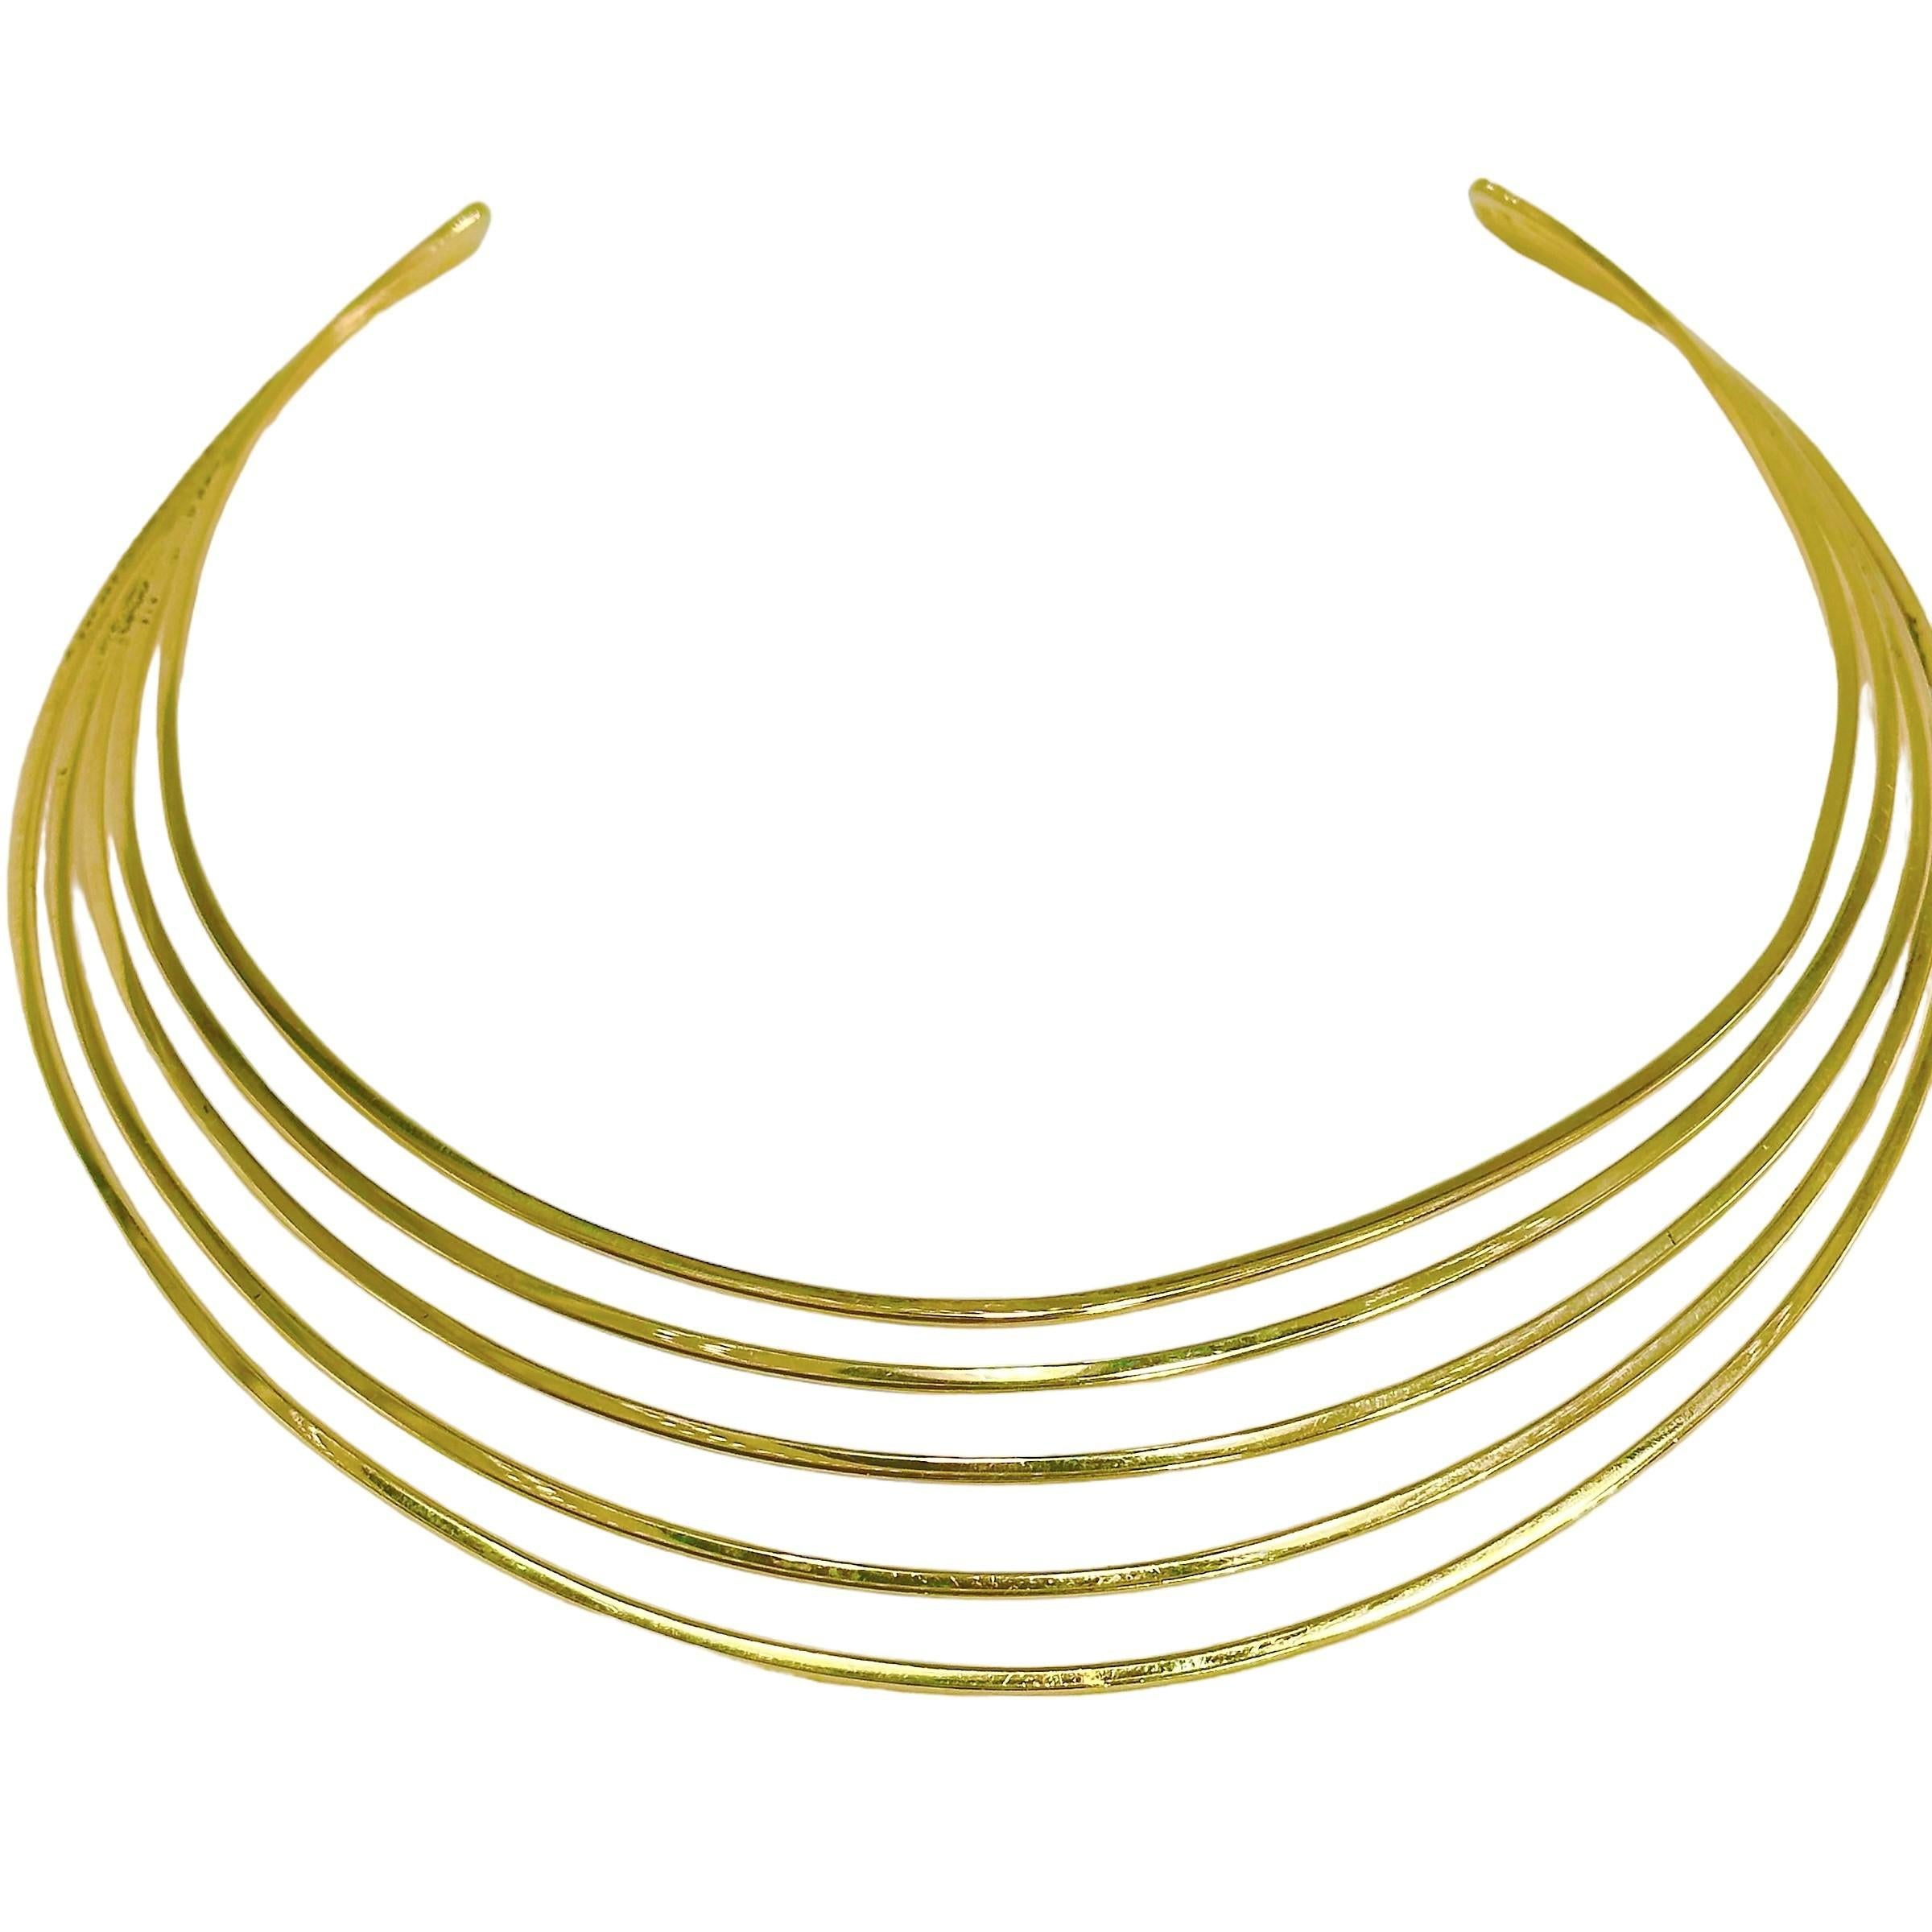 Stylish and Lightweight Vintage 14k Yellow Gold Five Row Choker Necklace